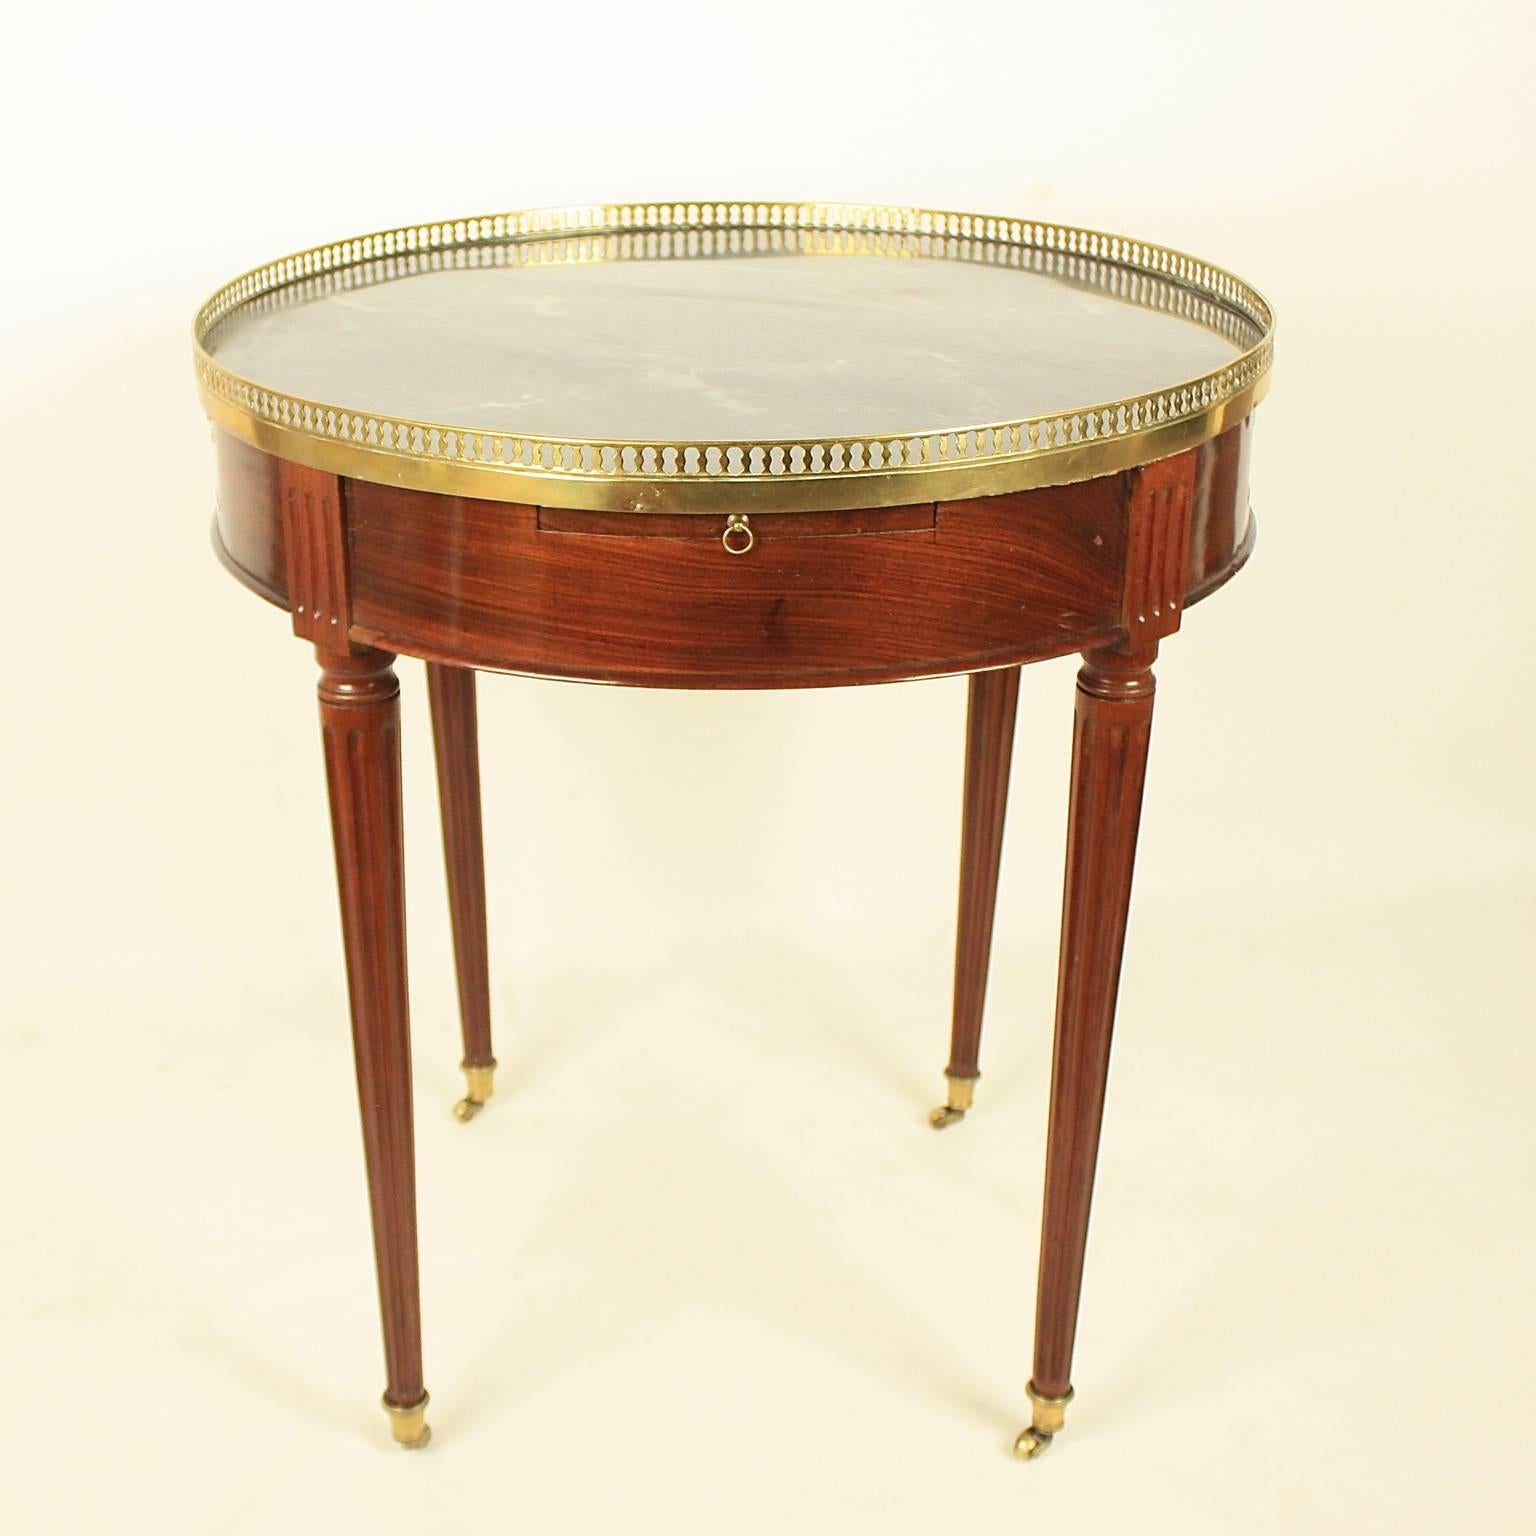 Late 18th Century Mahogany Bouillotte Table by J.J. Pafrat 1